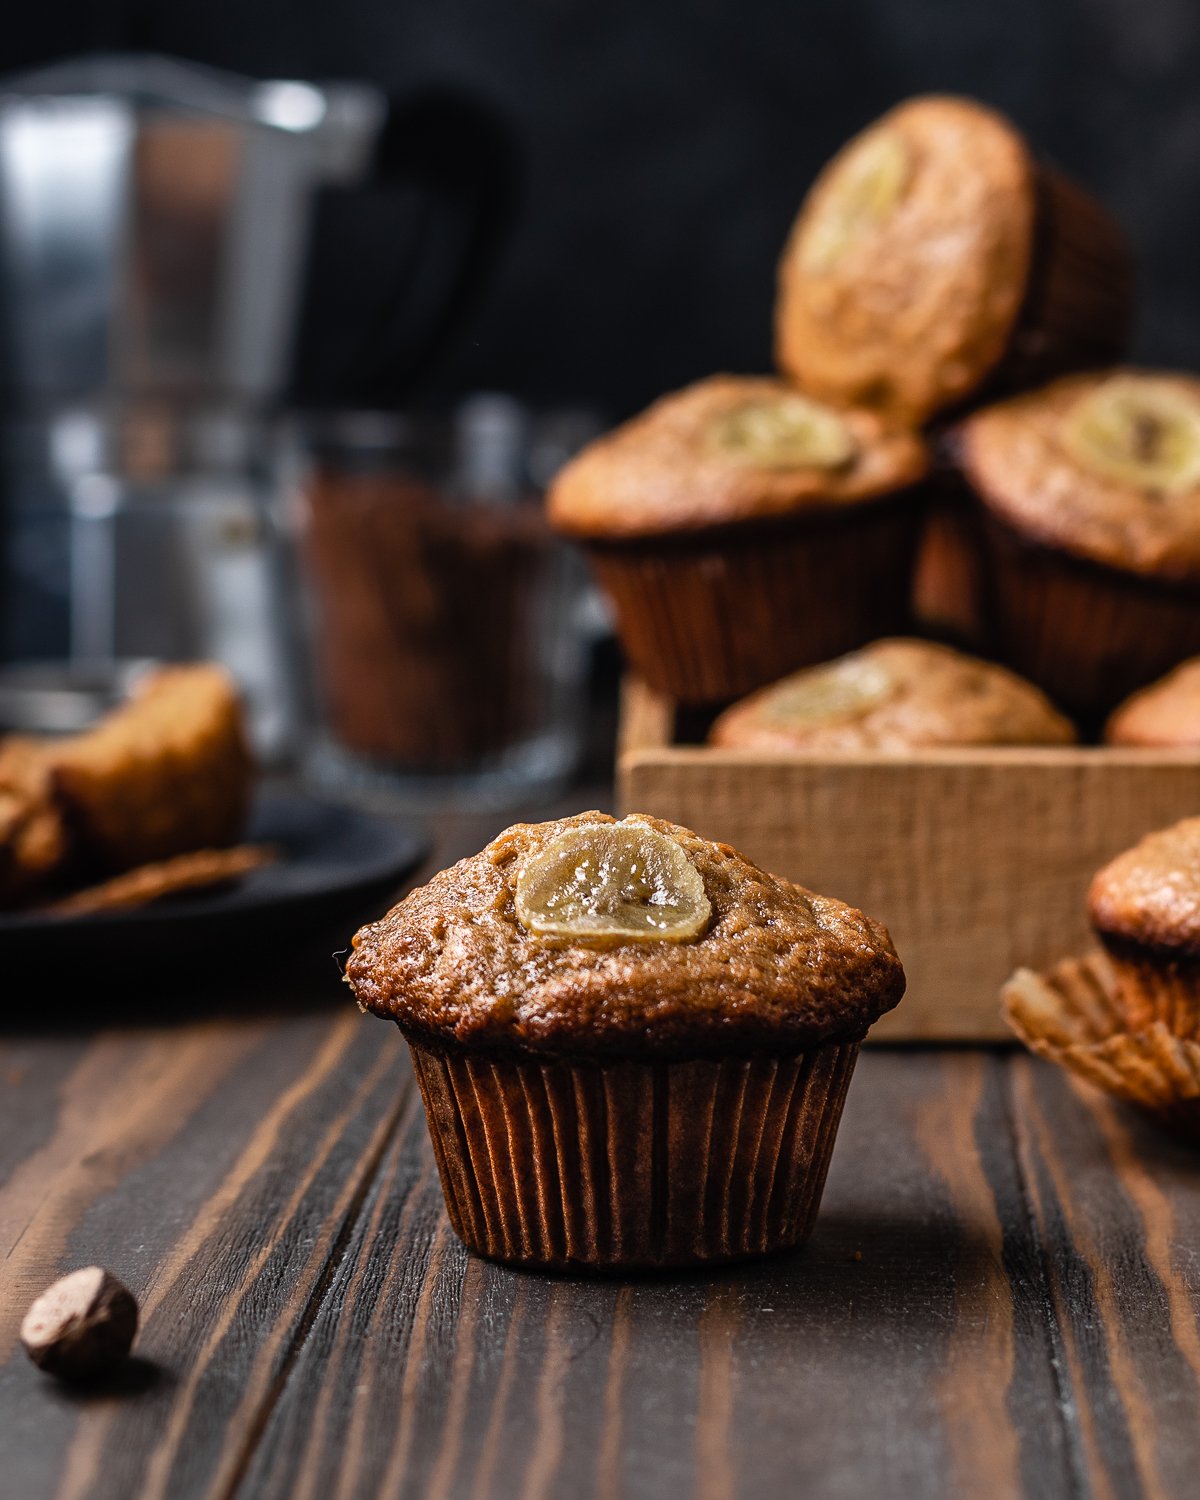 banana muffin with a slice of banana on top and bananas in a pie inside a woodbox in the background